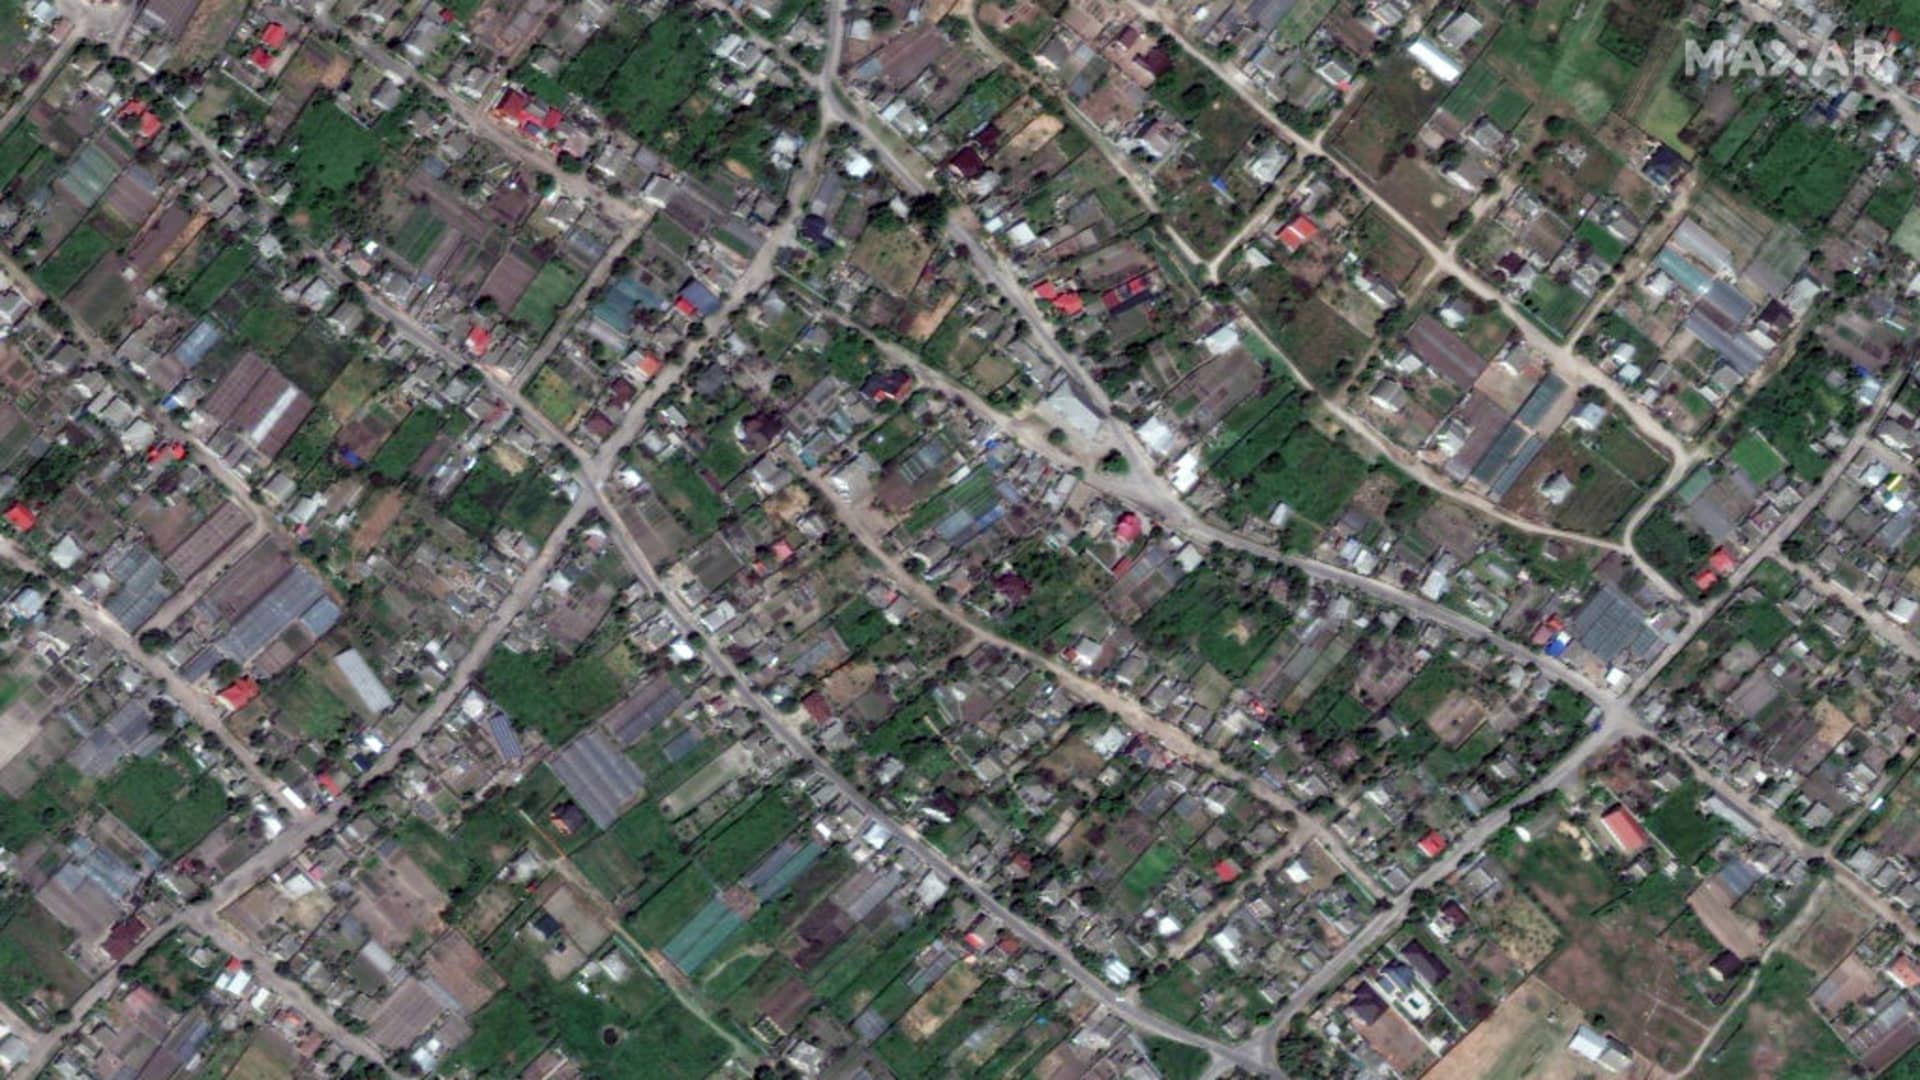 Maxar satellite imagery of the before/after images of flooded homes in Oleshky, Ukraine. 